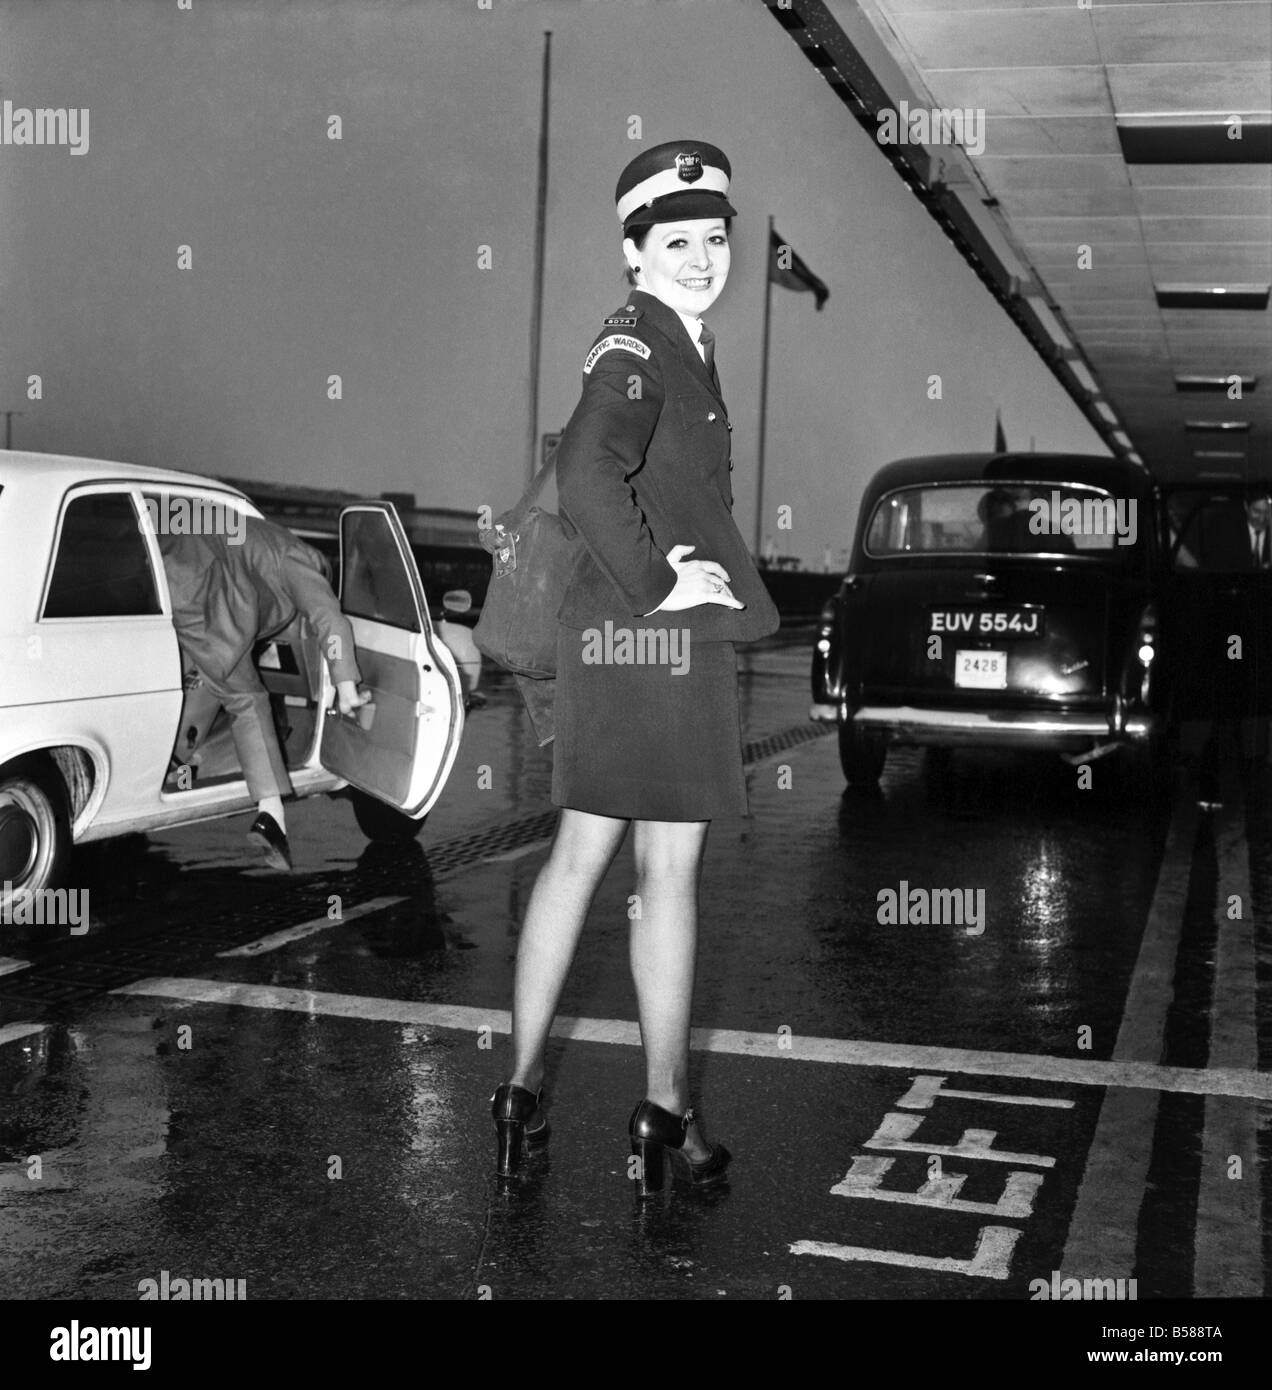 Beauty Queen Traffic Wardens. Travellers St London's Heathrow Airport may have their parking problems eased with cover girl smiles from two ex-model Traffic Wardens. Miss Denise Humphreys and Mrs. Linda Morton, Former beauty queens and models, have been stationed at the Airport since last Autumn. January 1975 75-00661 Stock Photo